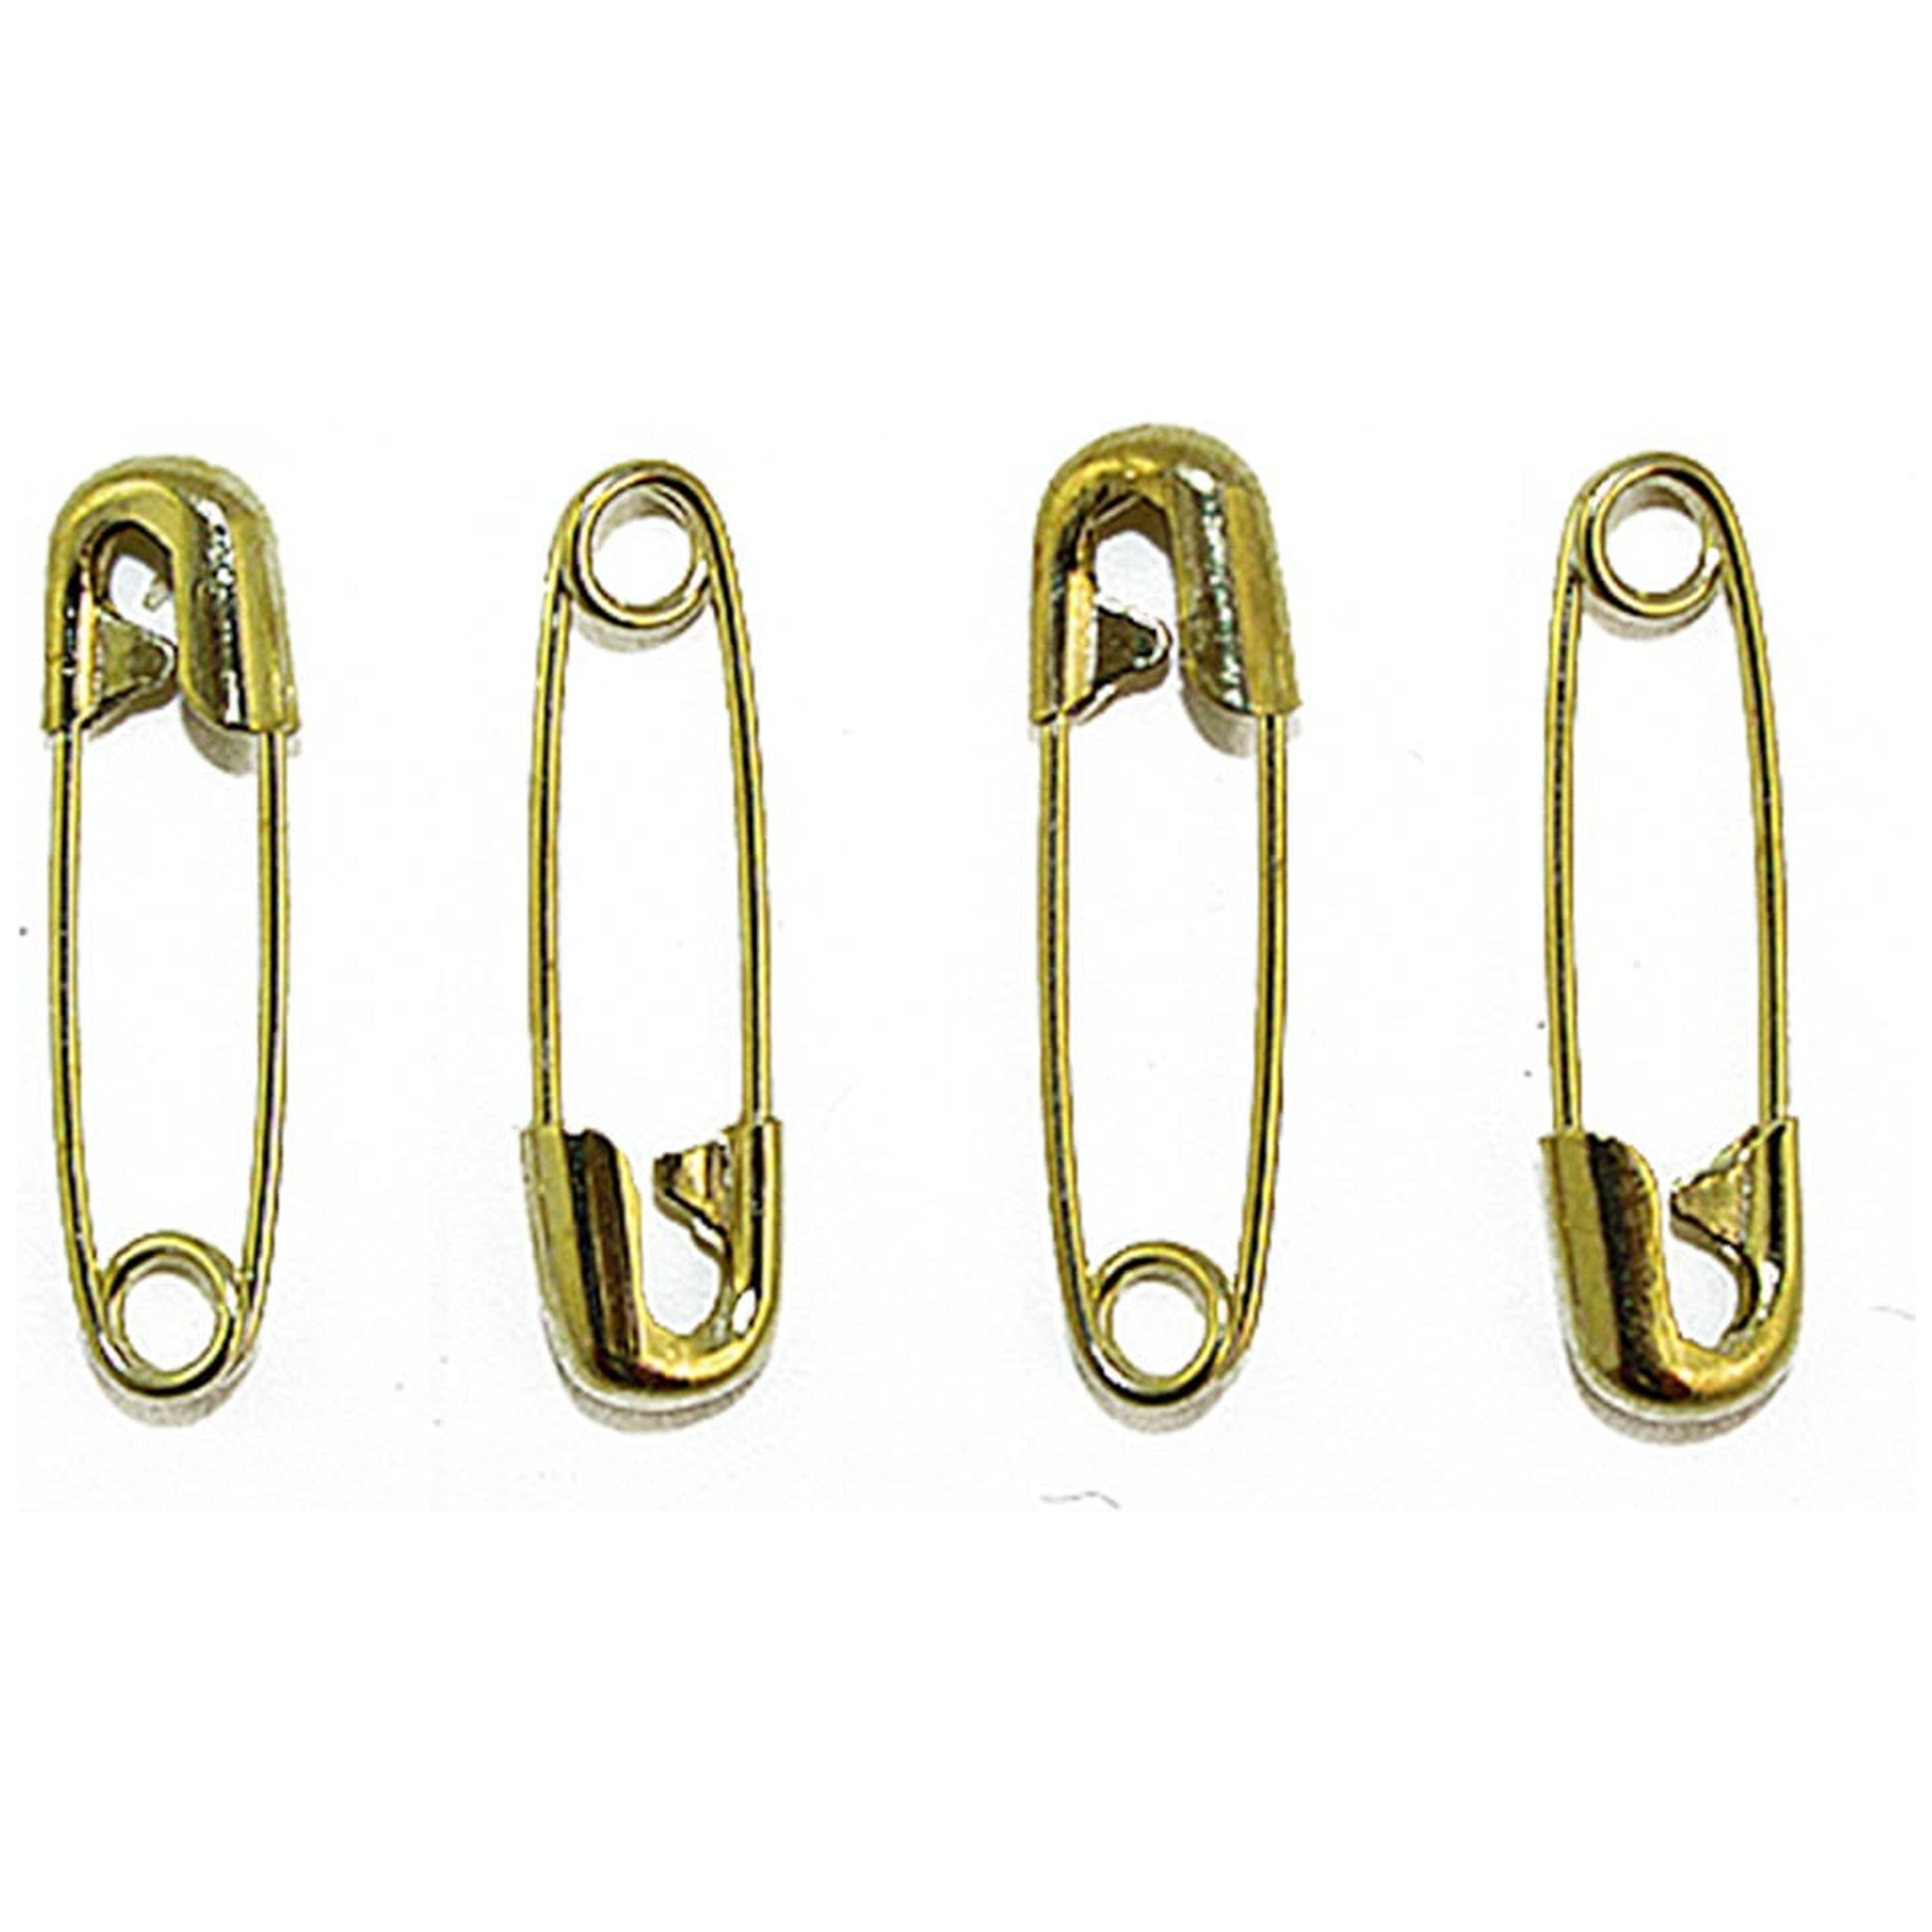 50 Small Tiny Gold Metal Steel Mini Safety Pins 2cm 20mm